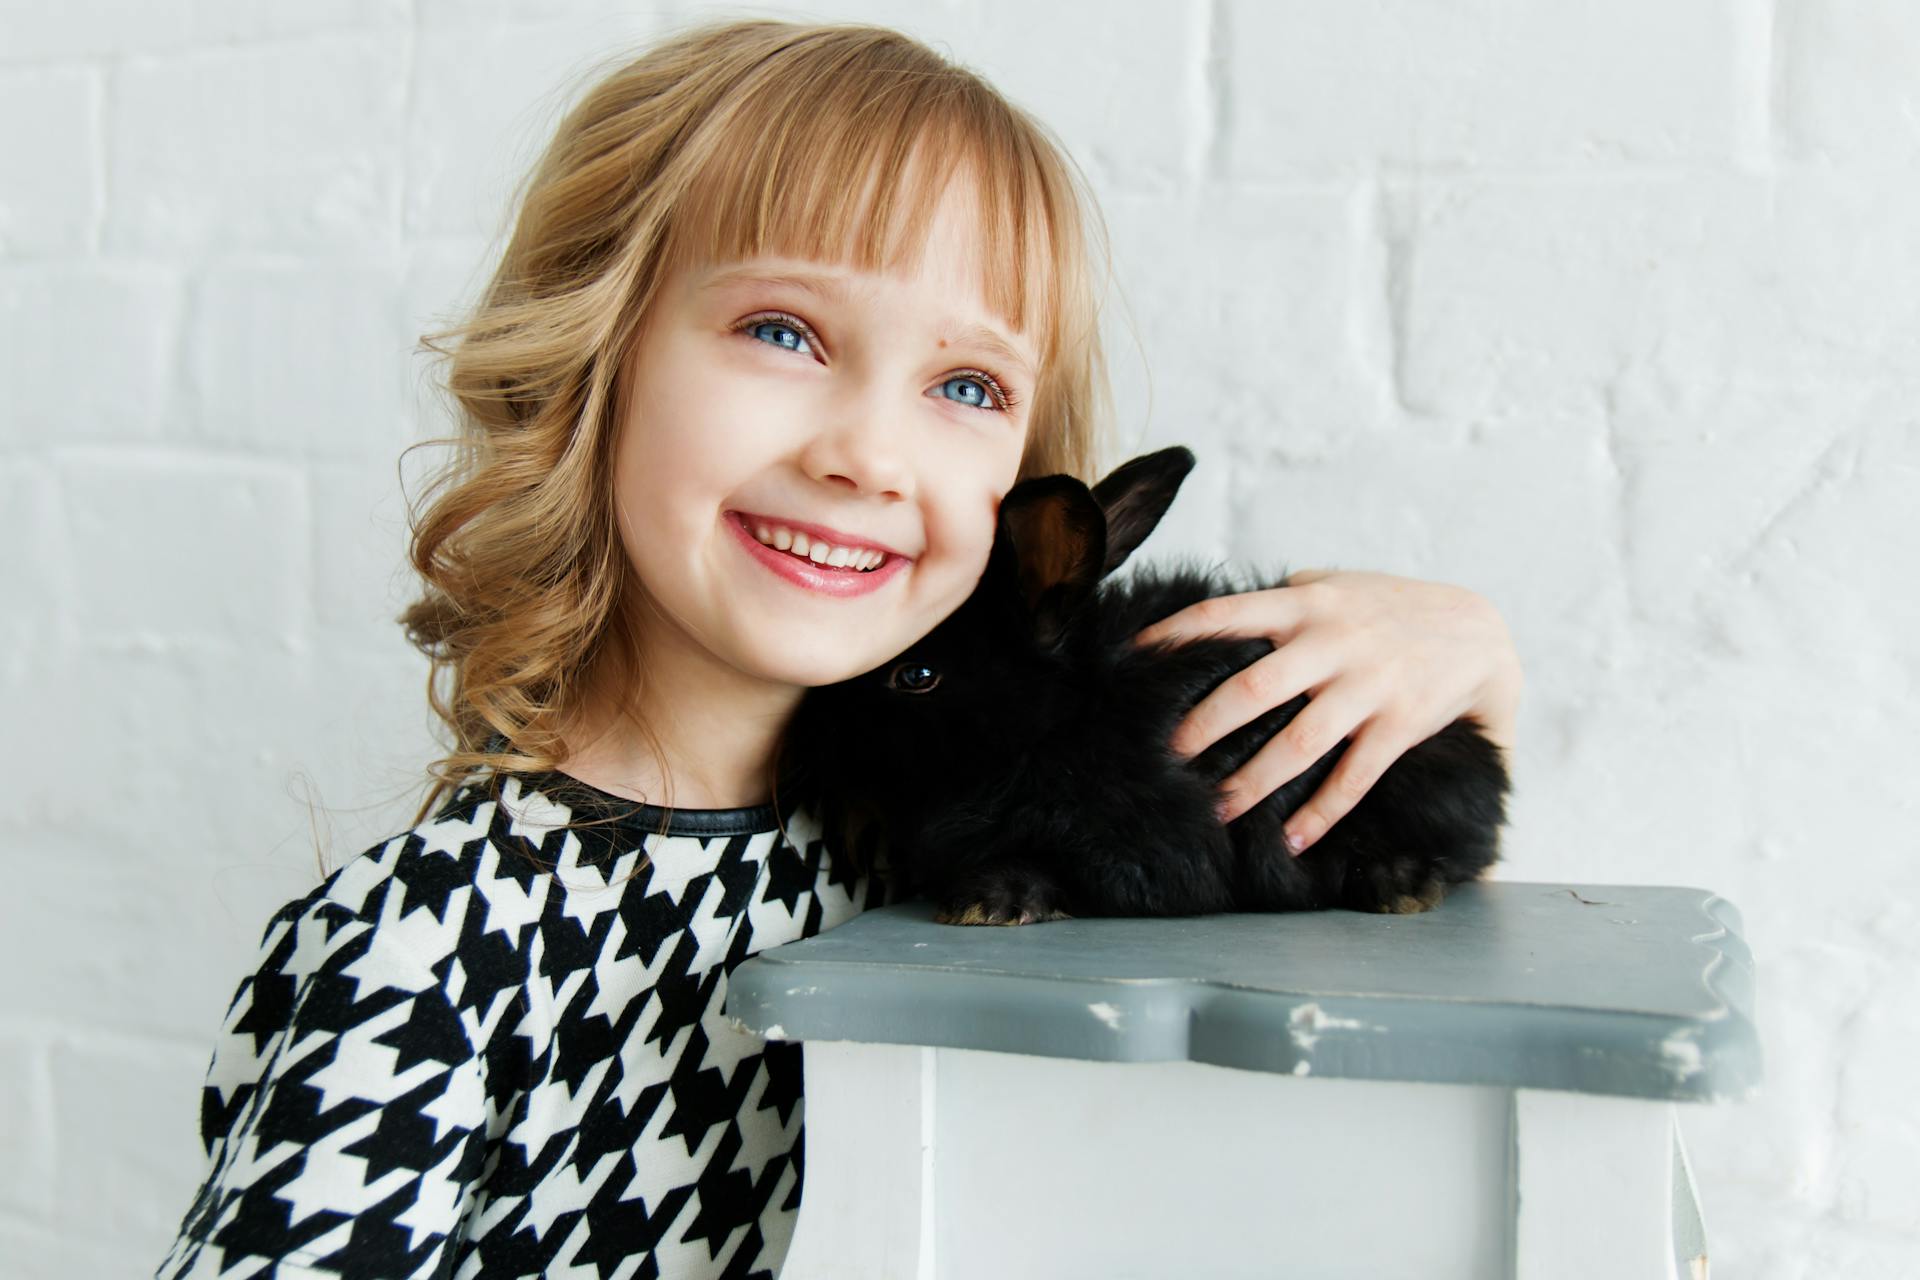 A smiling child holding a rabbit | Source: Pexels